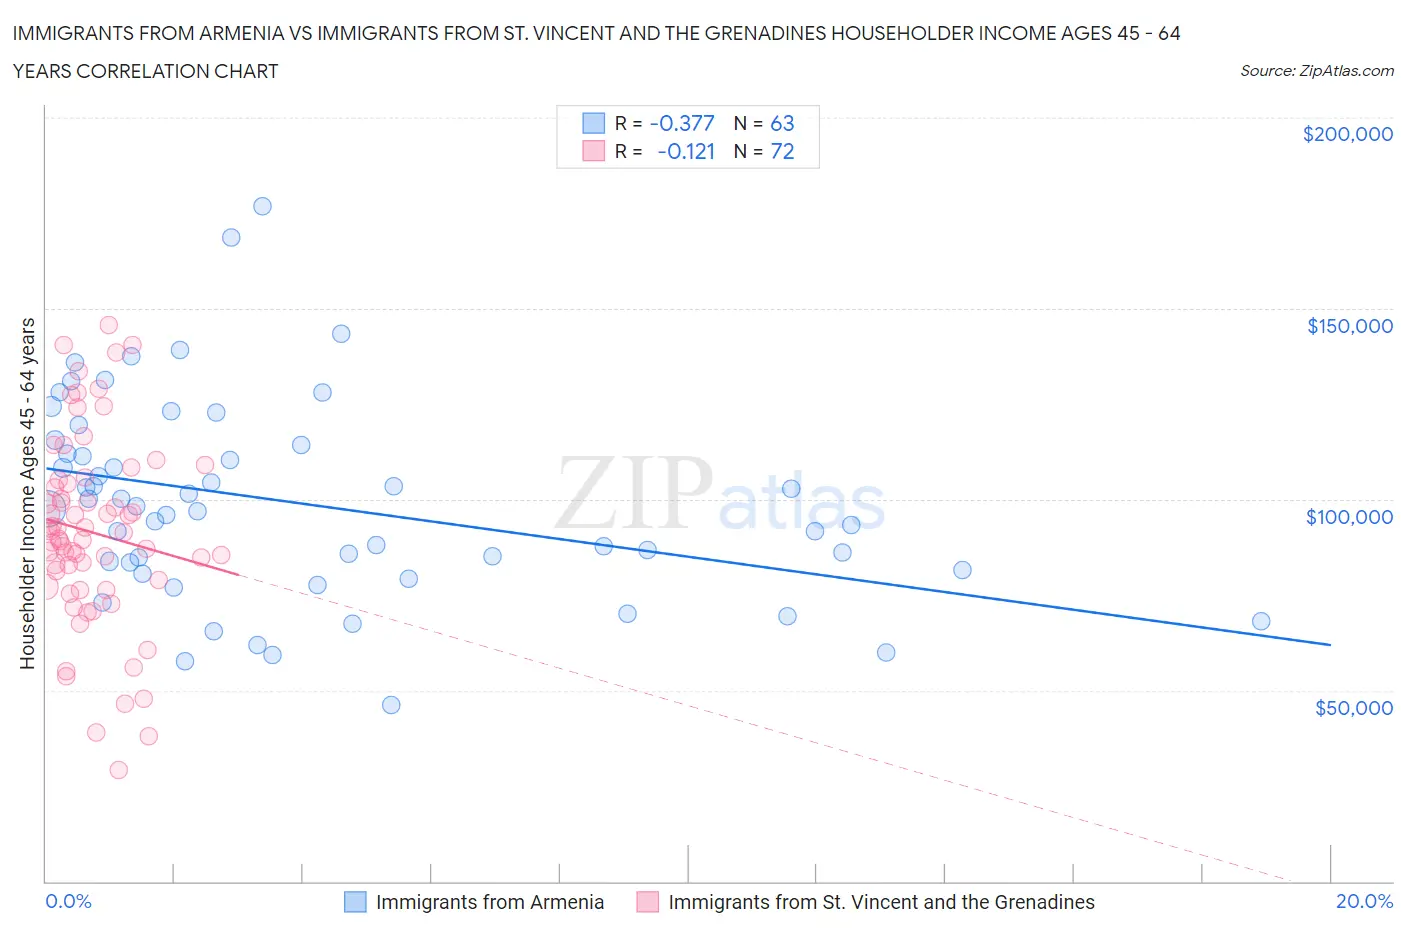 Immigrants from Armenia vs Immigrants from St. Vincent and the Grenadines Householder Income Ages 45 - 64 years